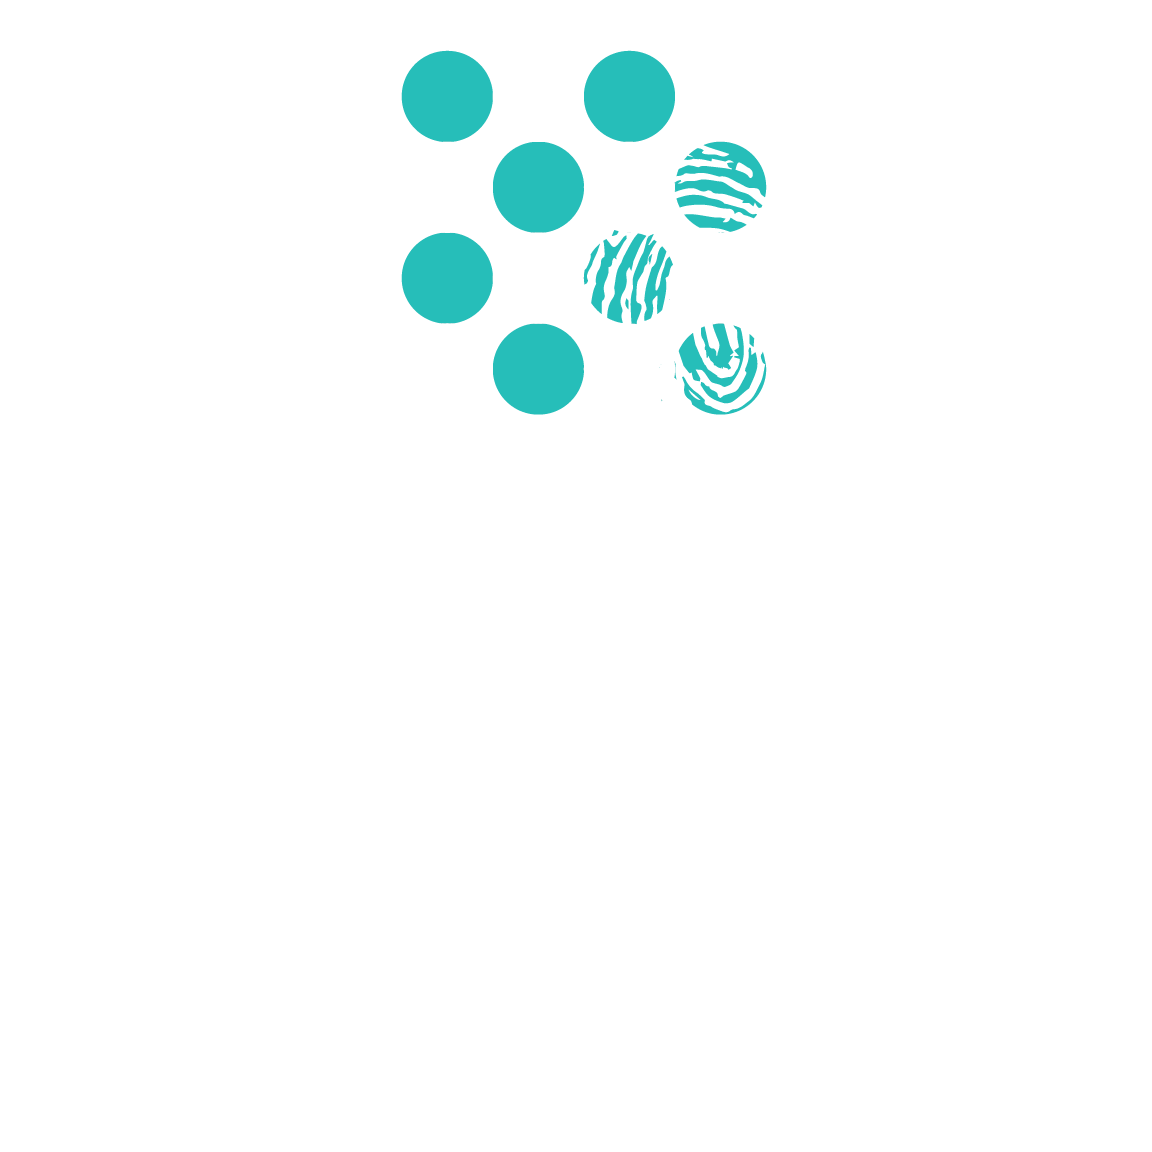 Compliance & Forensic Caribbrean | 25 years of integrity